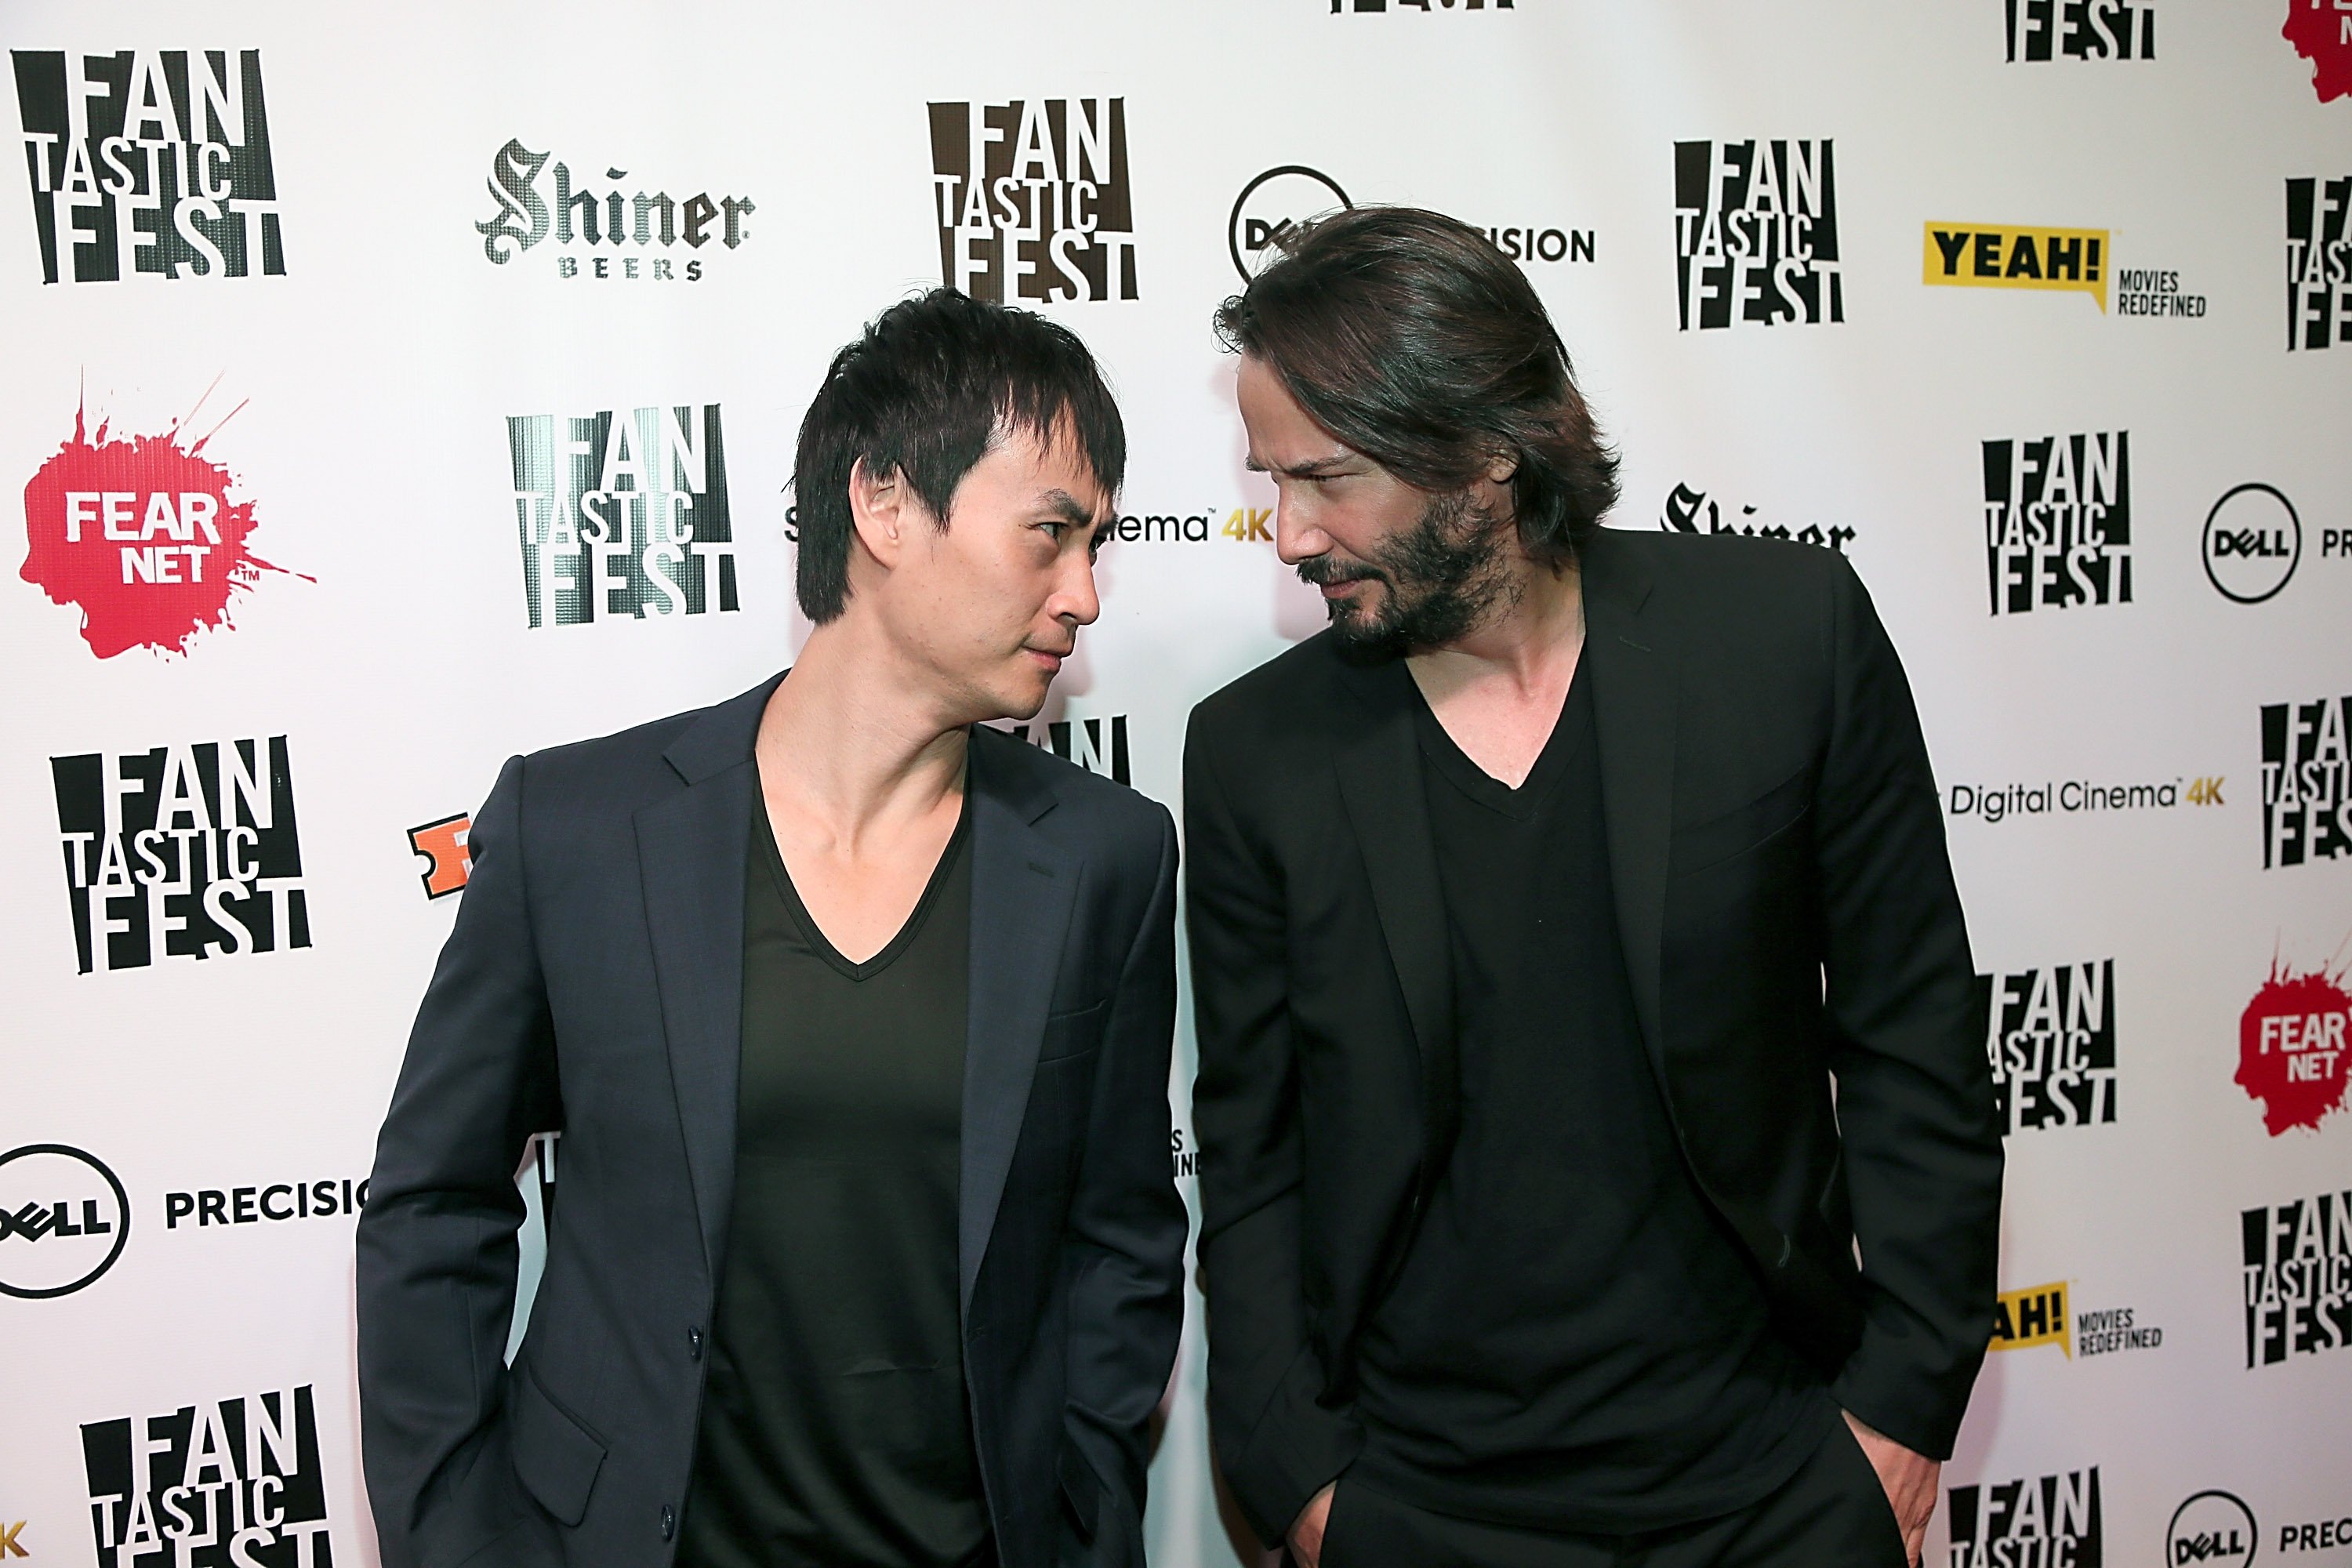 Keanu Reeves and Tiger Chen face off